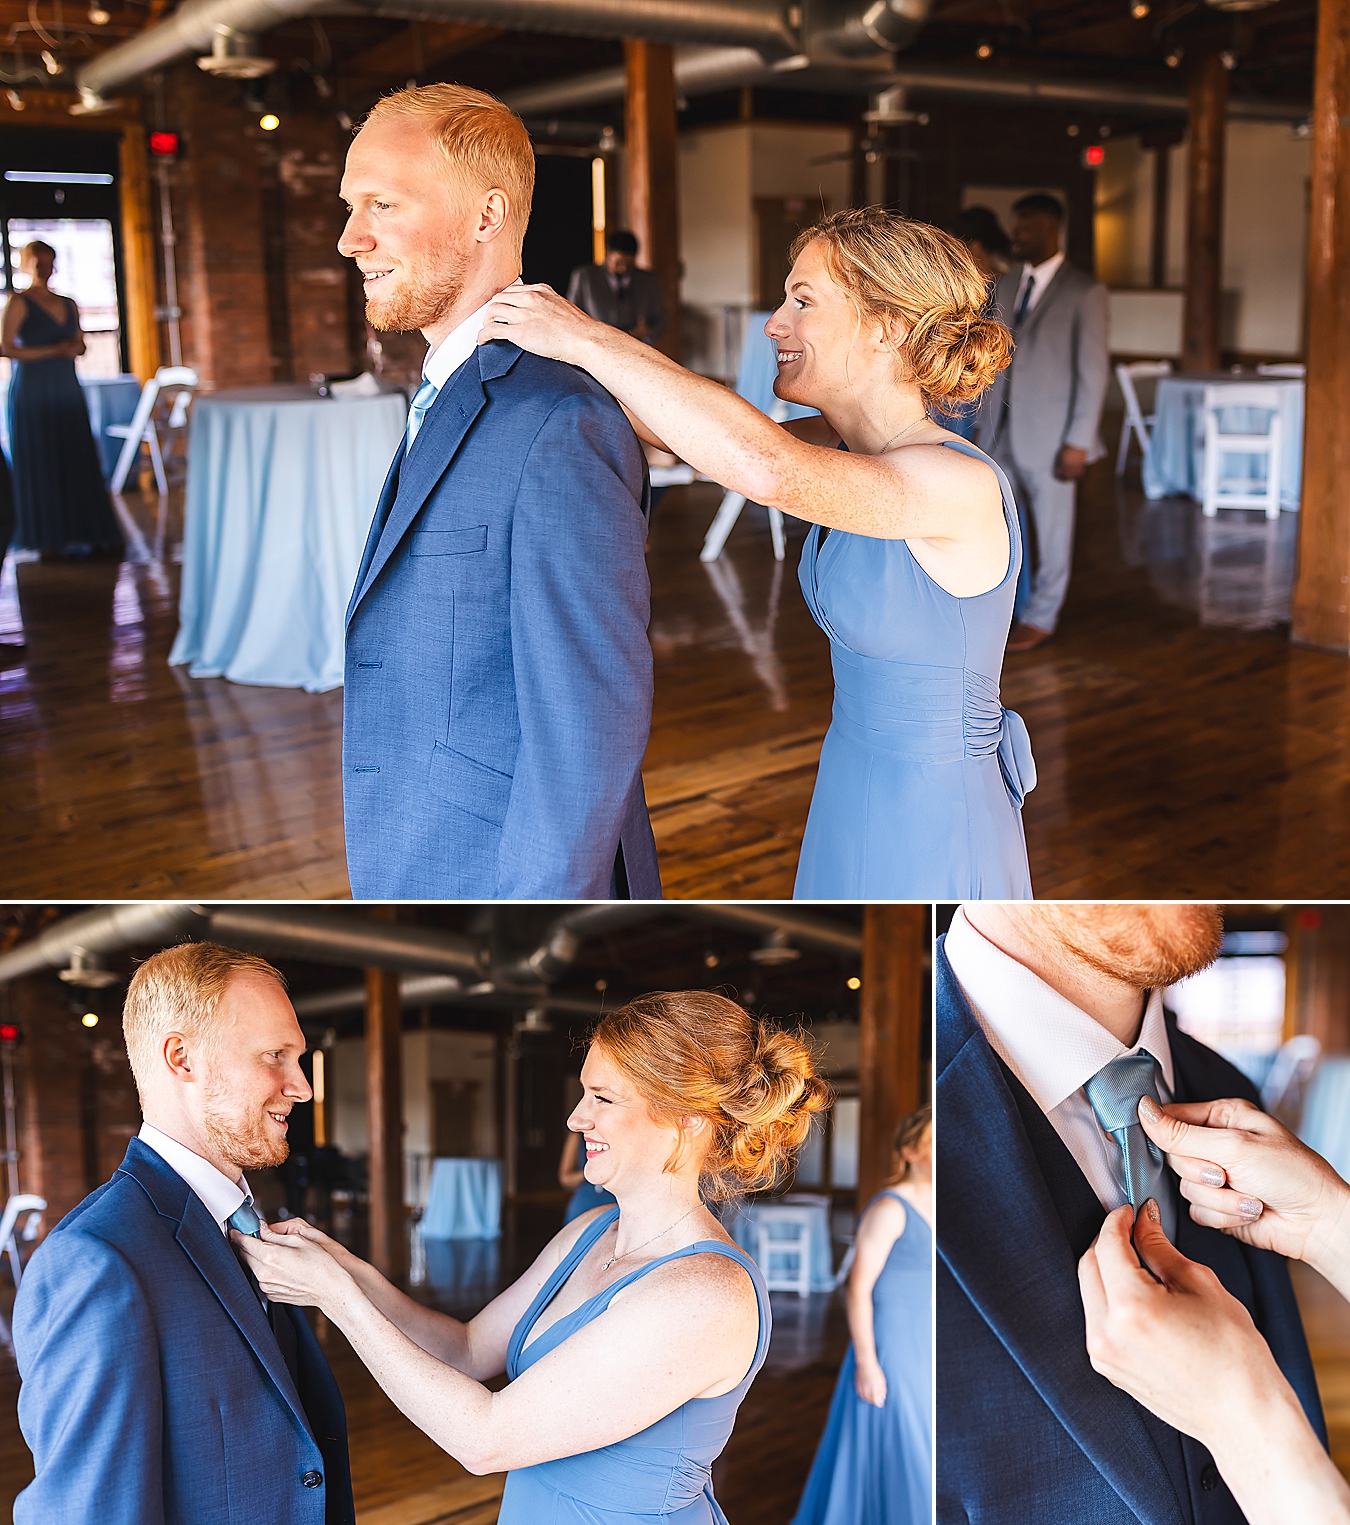 Wedding at the Mavris | Indianapolis Wedding Photographers | casey and her camera